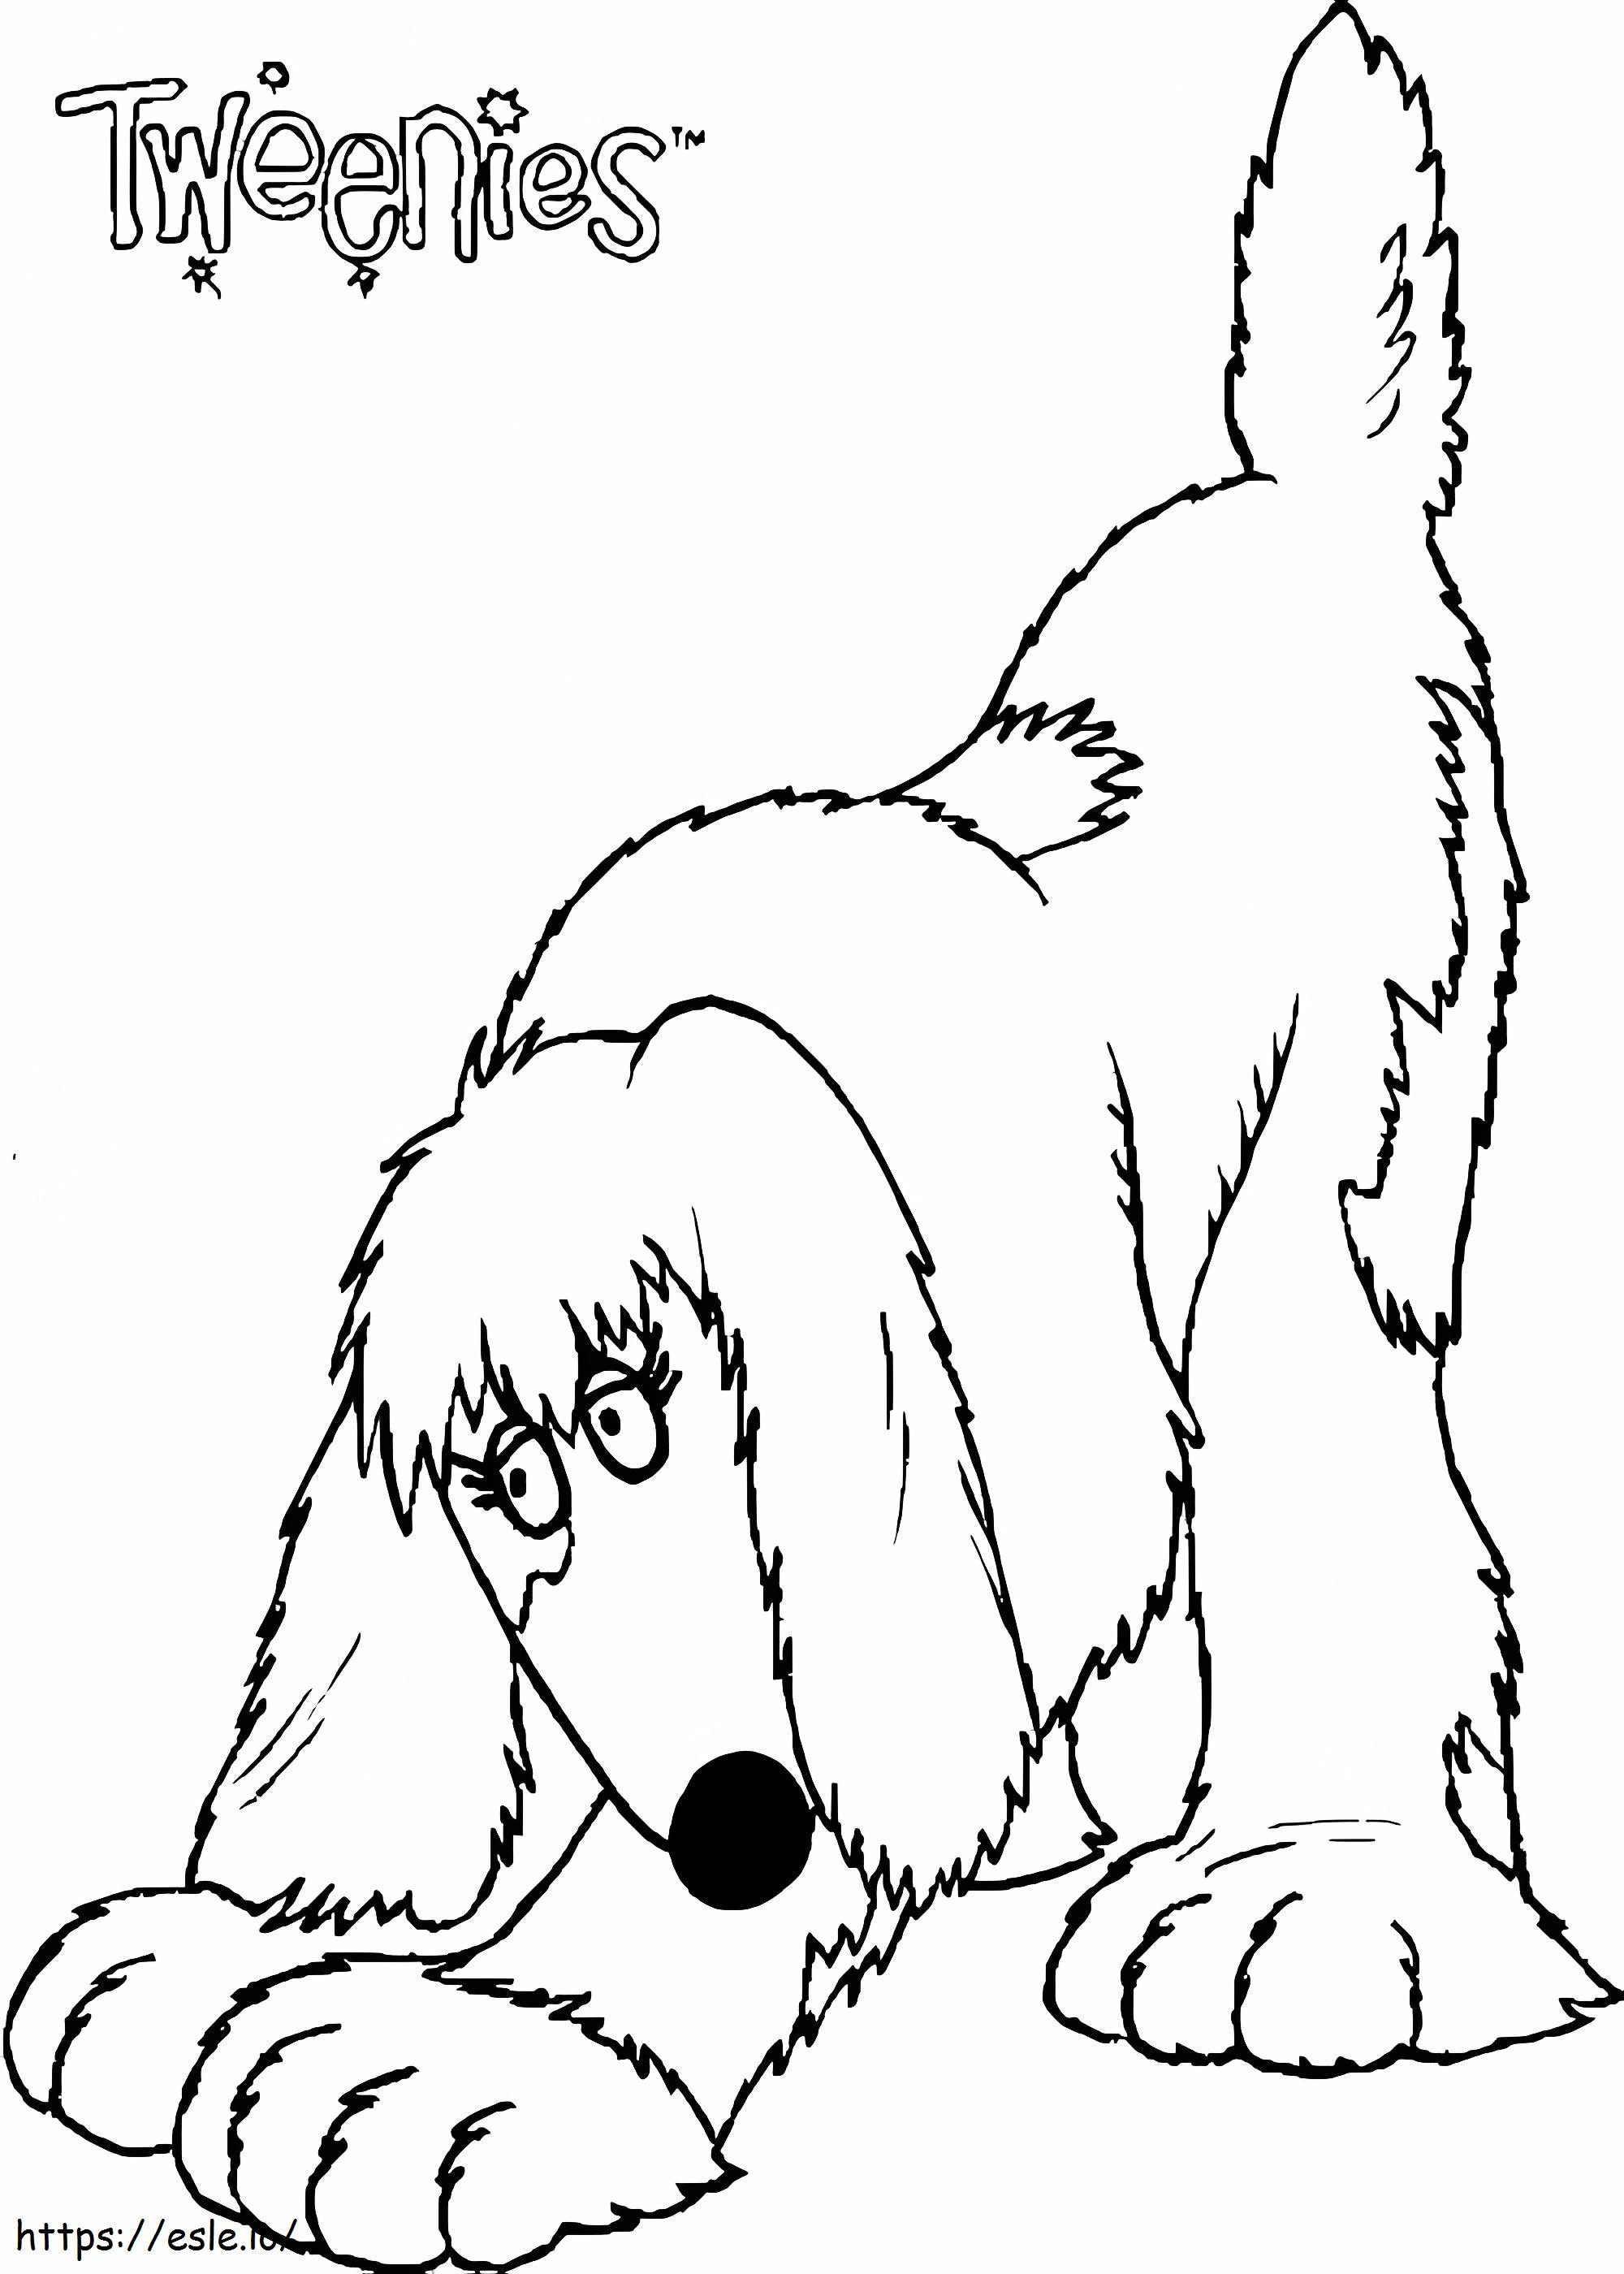 Beautiful Izzles coloring page